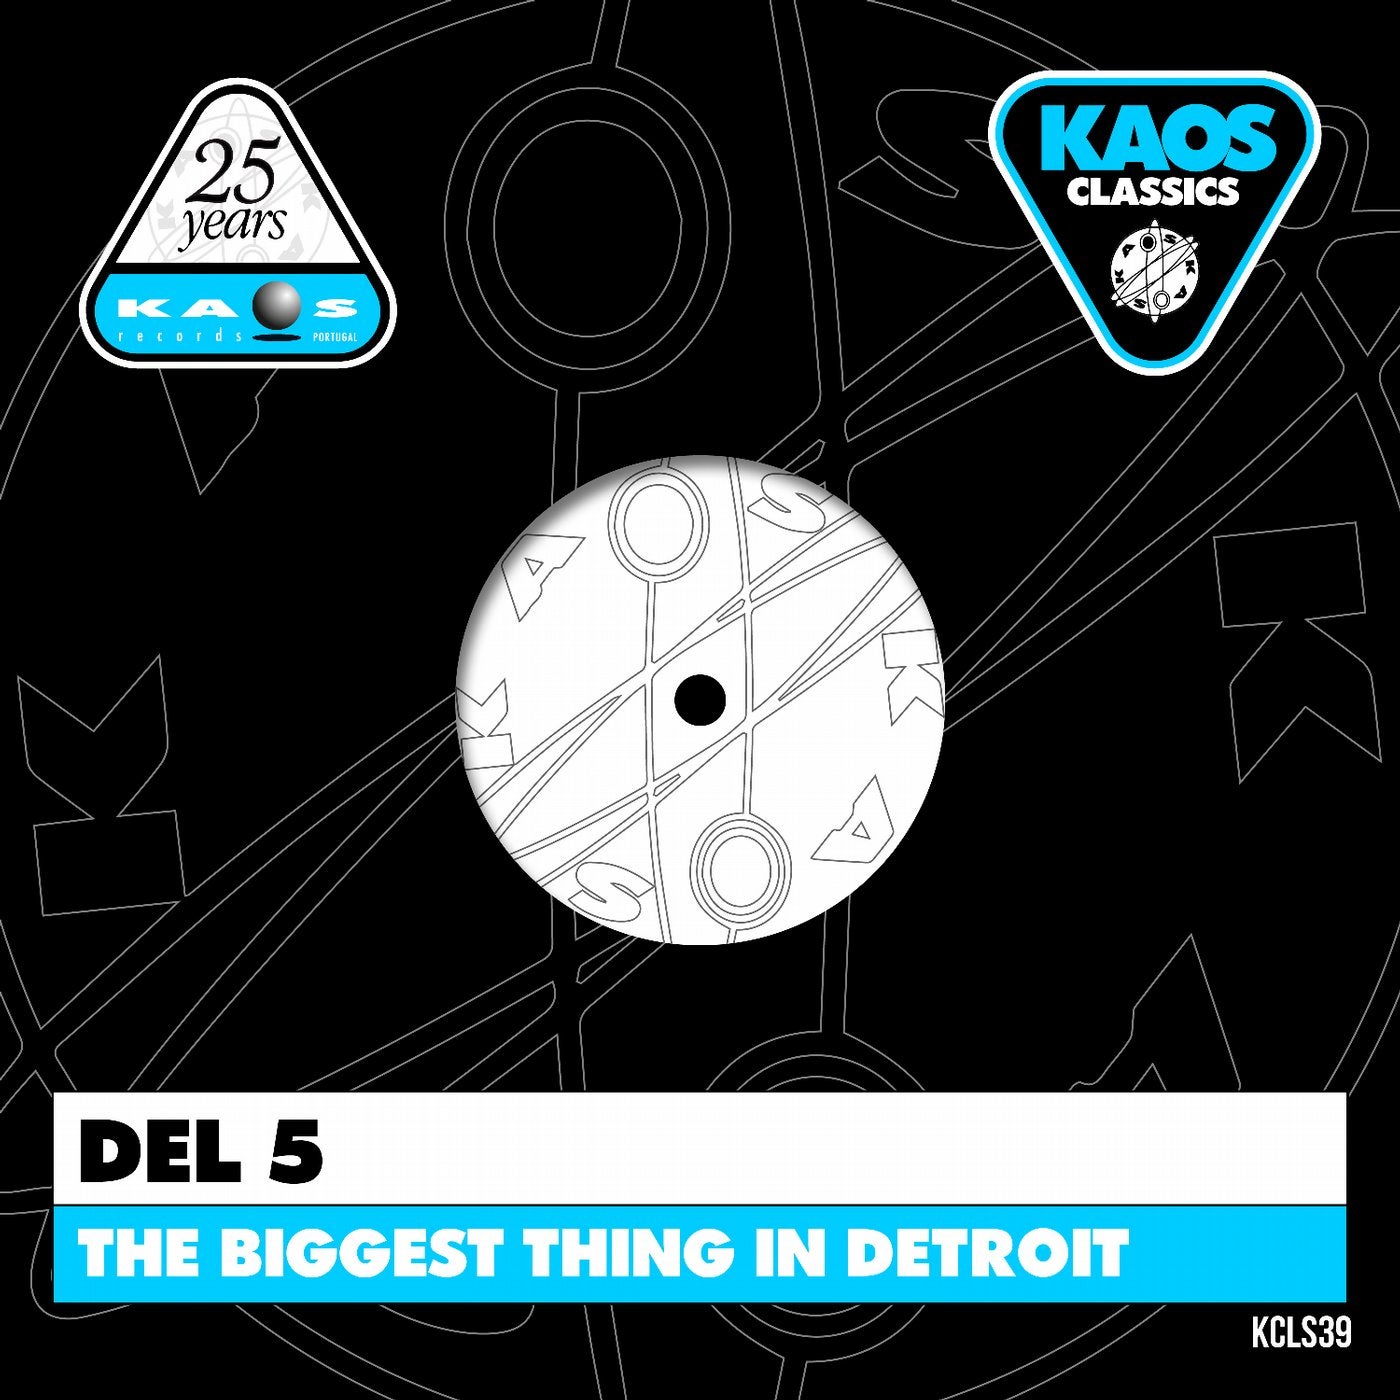 Del 5 - The Biggest Thing In Detroit